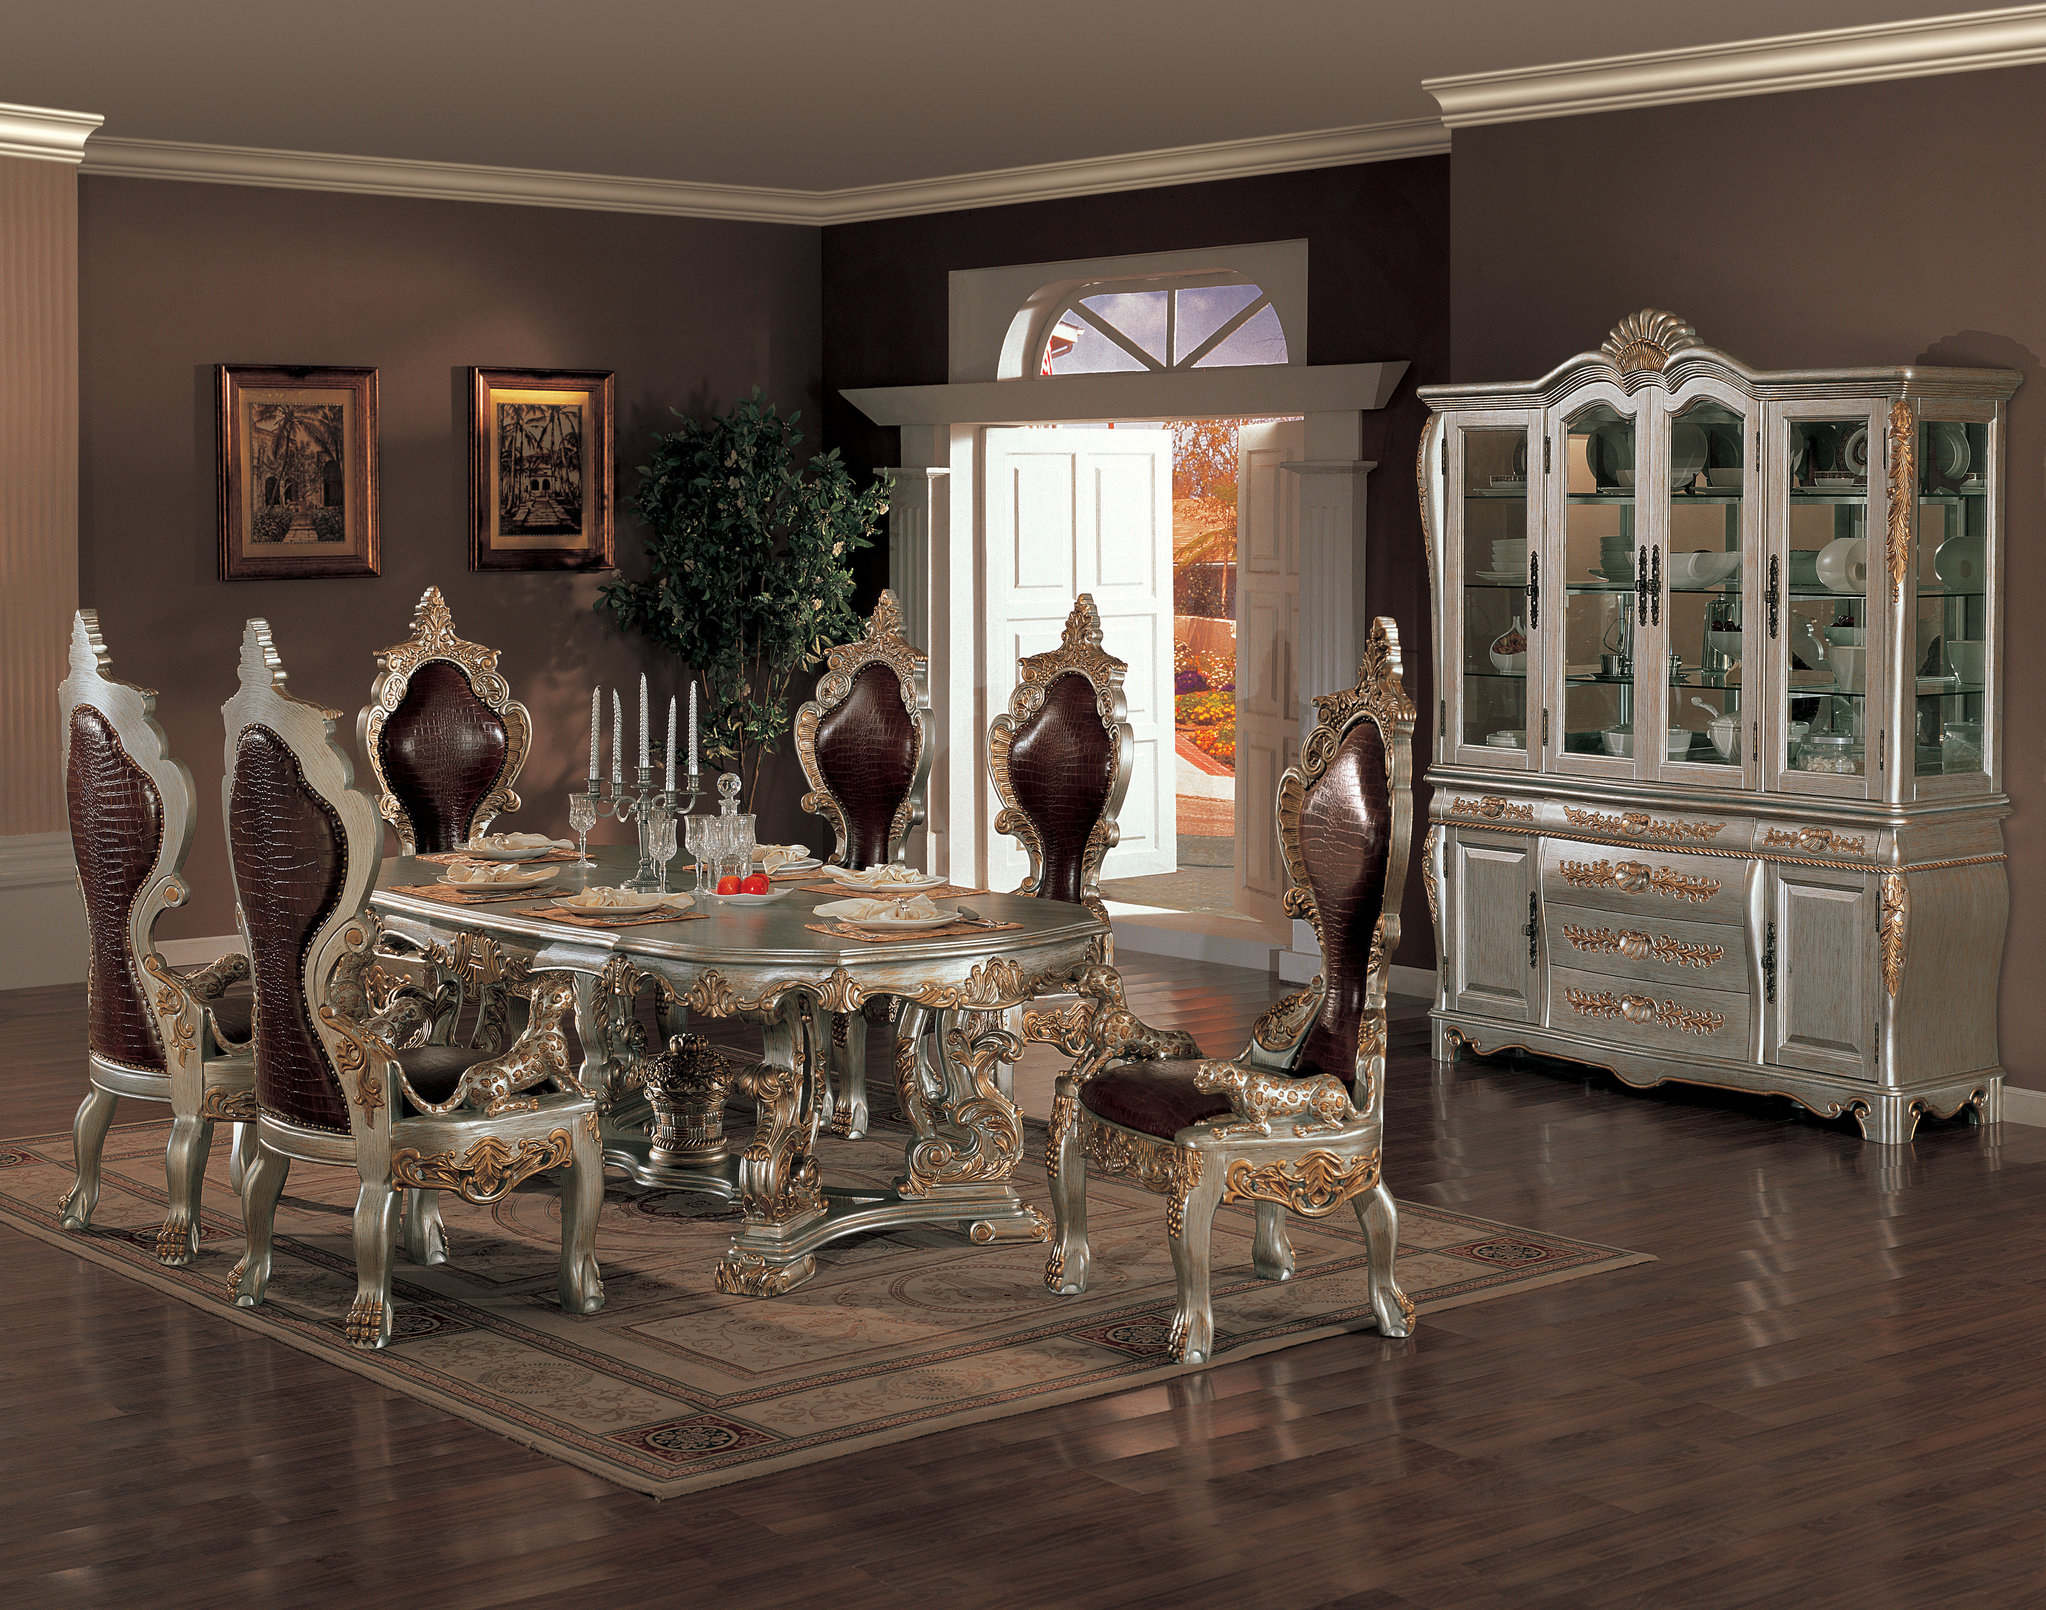 Dining Room With Buffet Table Elegant And Ornate Wood throughout dimensions 2046 X 1610